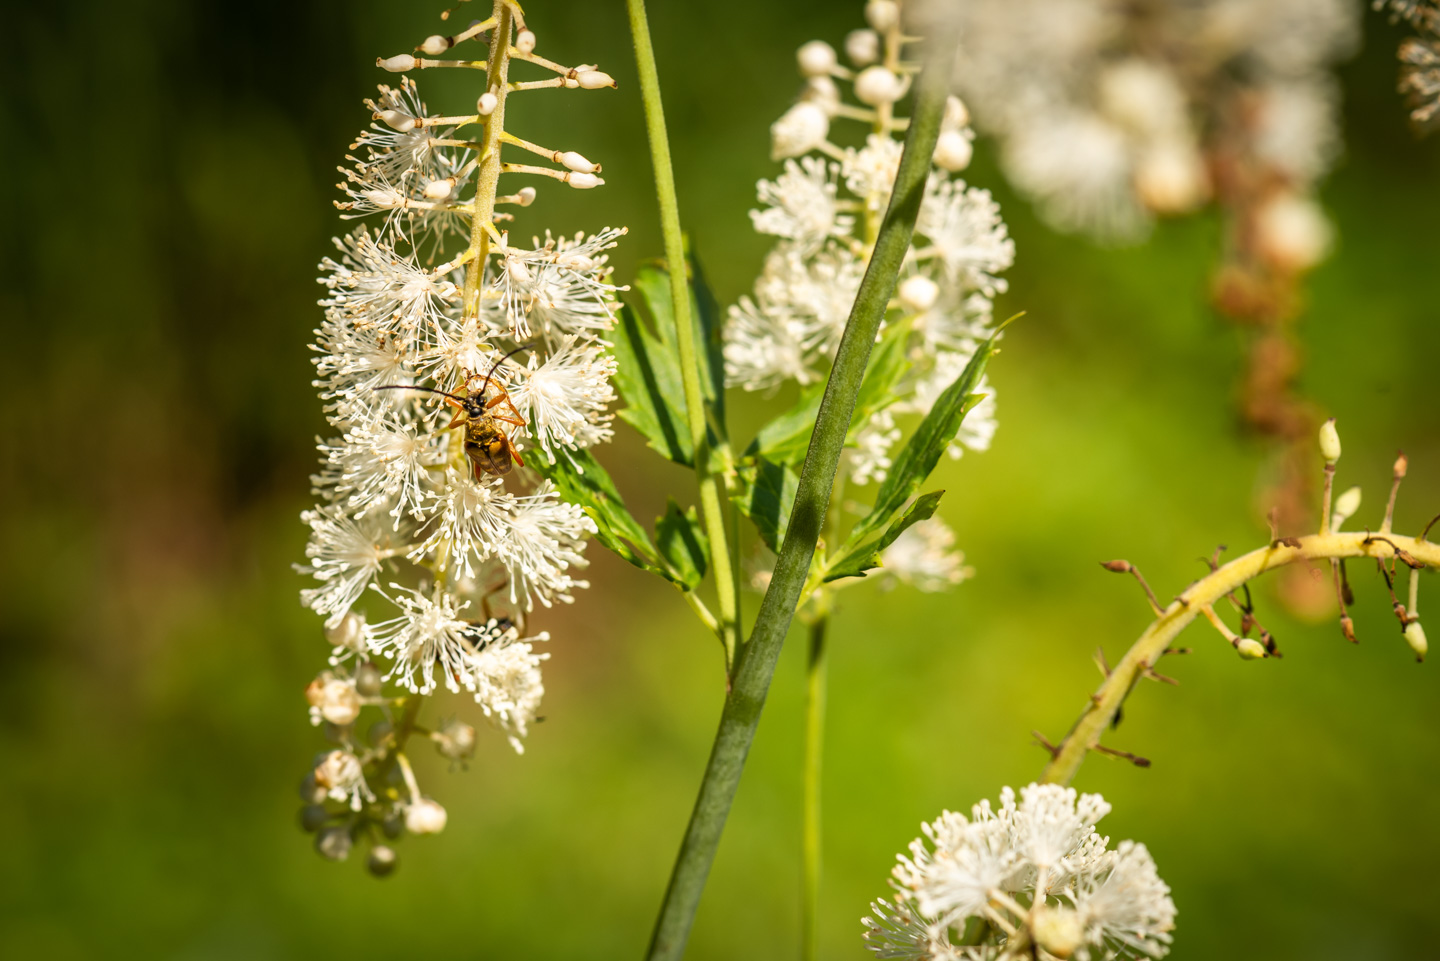 An insect collecting nectar on a Baneberry flower